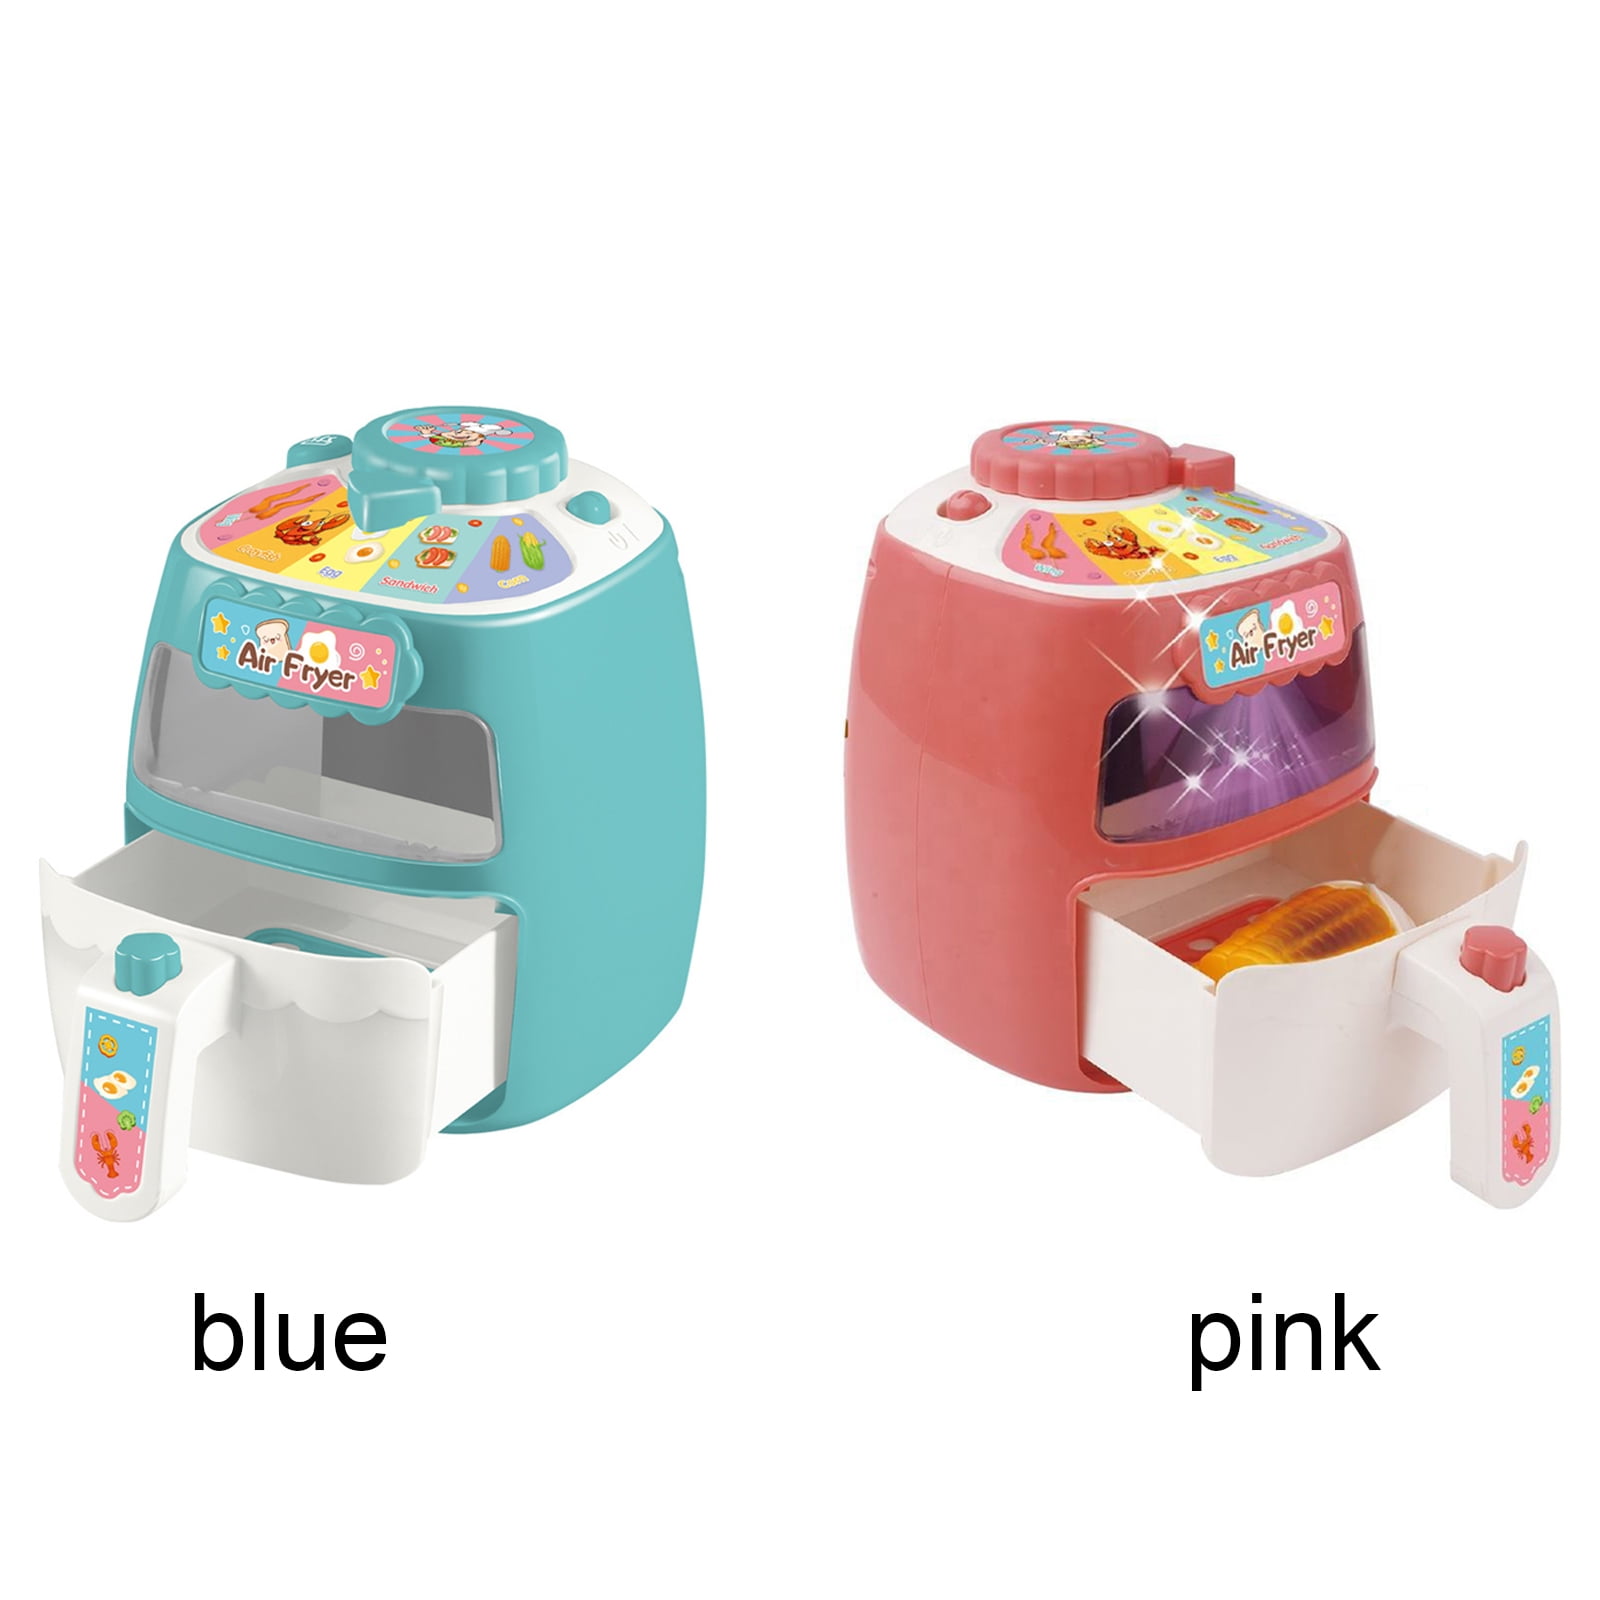 deAO Toy Air Fryer for Kids,19PCS Kitchen Playset Toy with Sounds and  Lights Role Playing Game,Color Changing Play Foods Pretend Food and Cooking